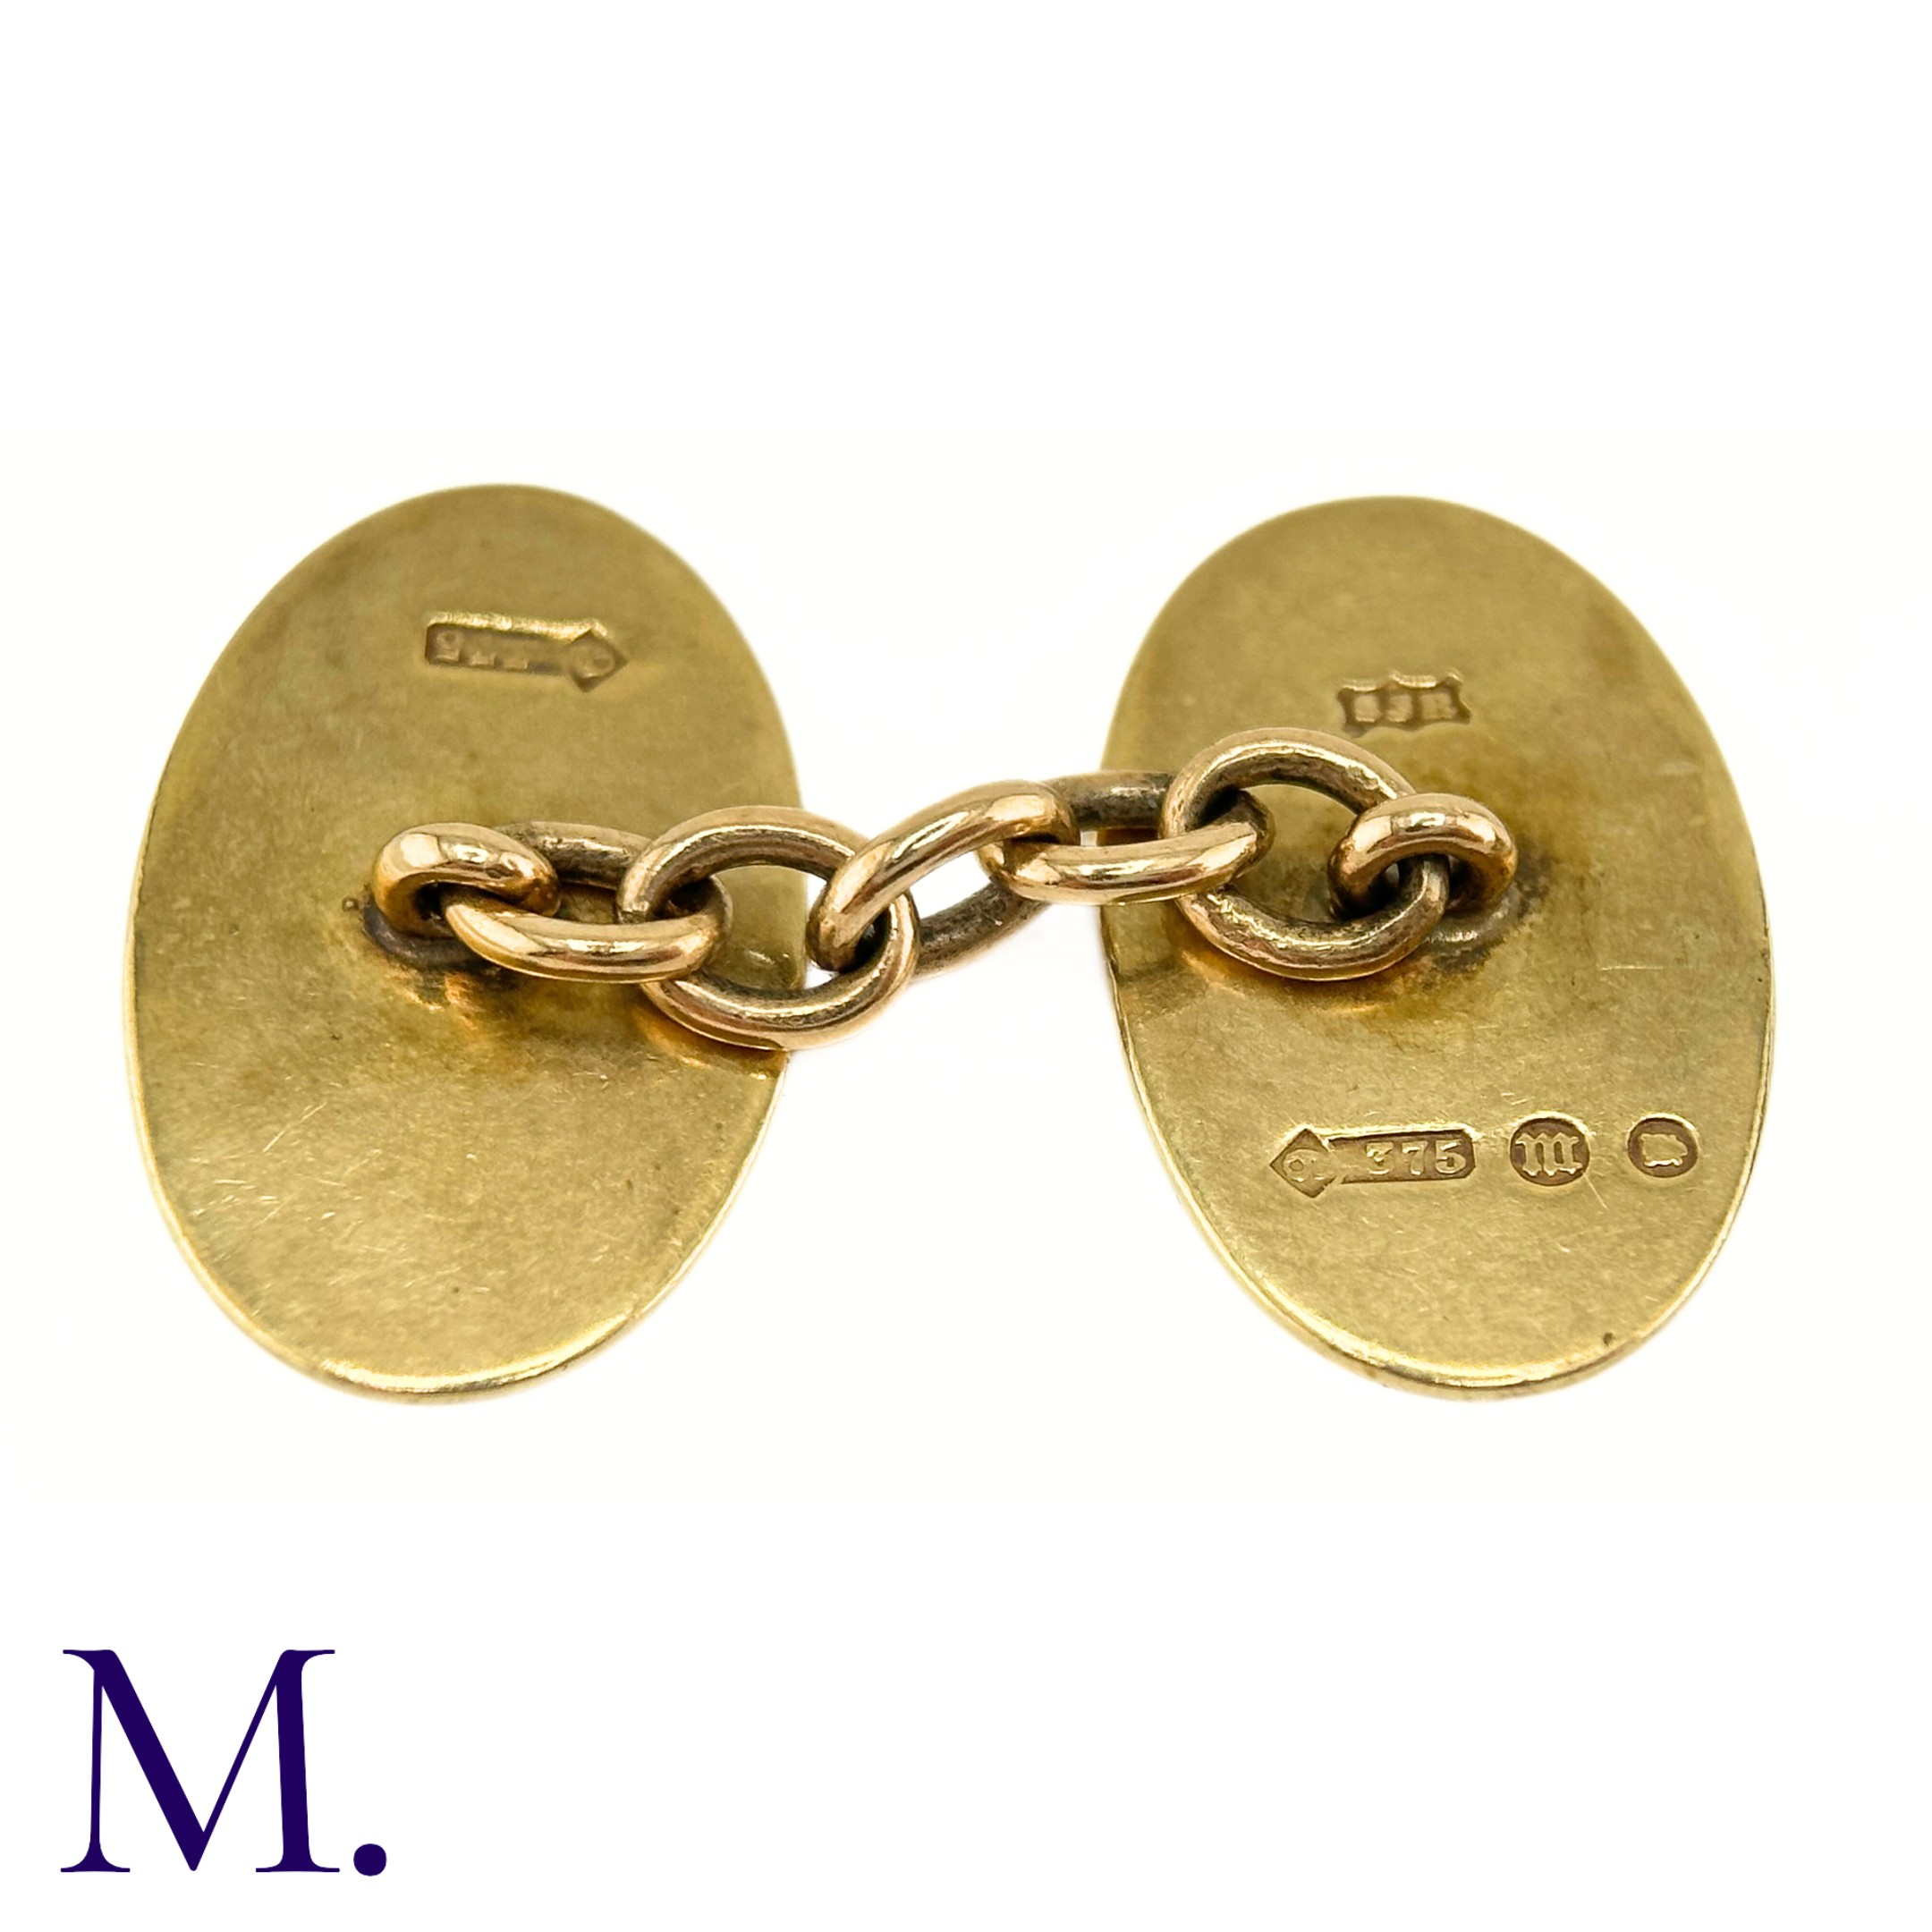 NO RESERVE - A Pair of 9ct Gold Cufflinks The 9ct yellow gold cufflinks are oval in shape with chain - Image 4 of 4